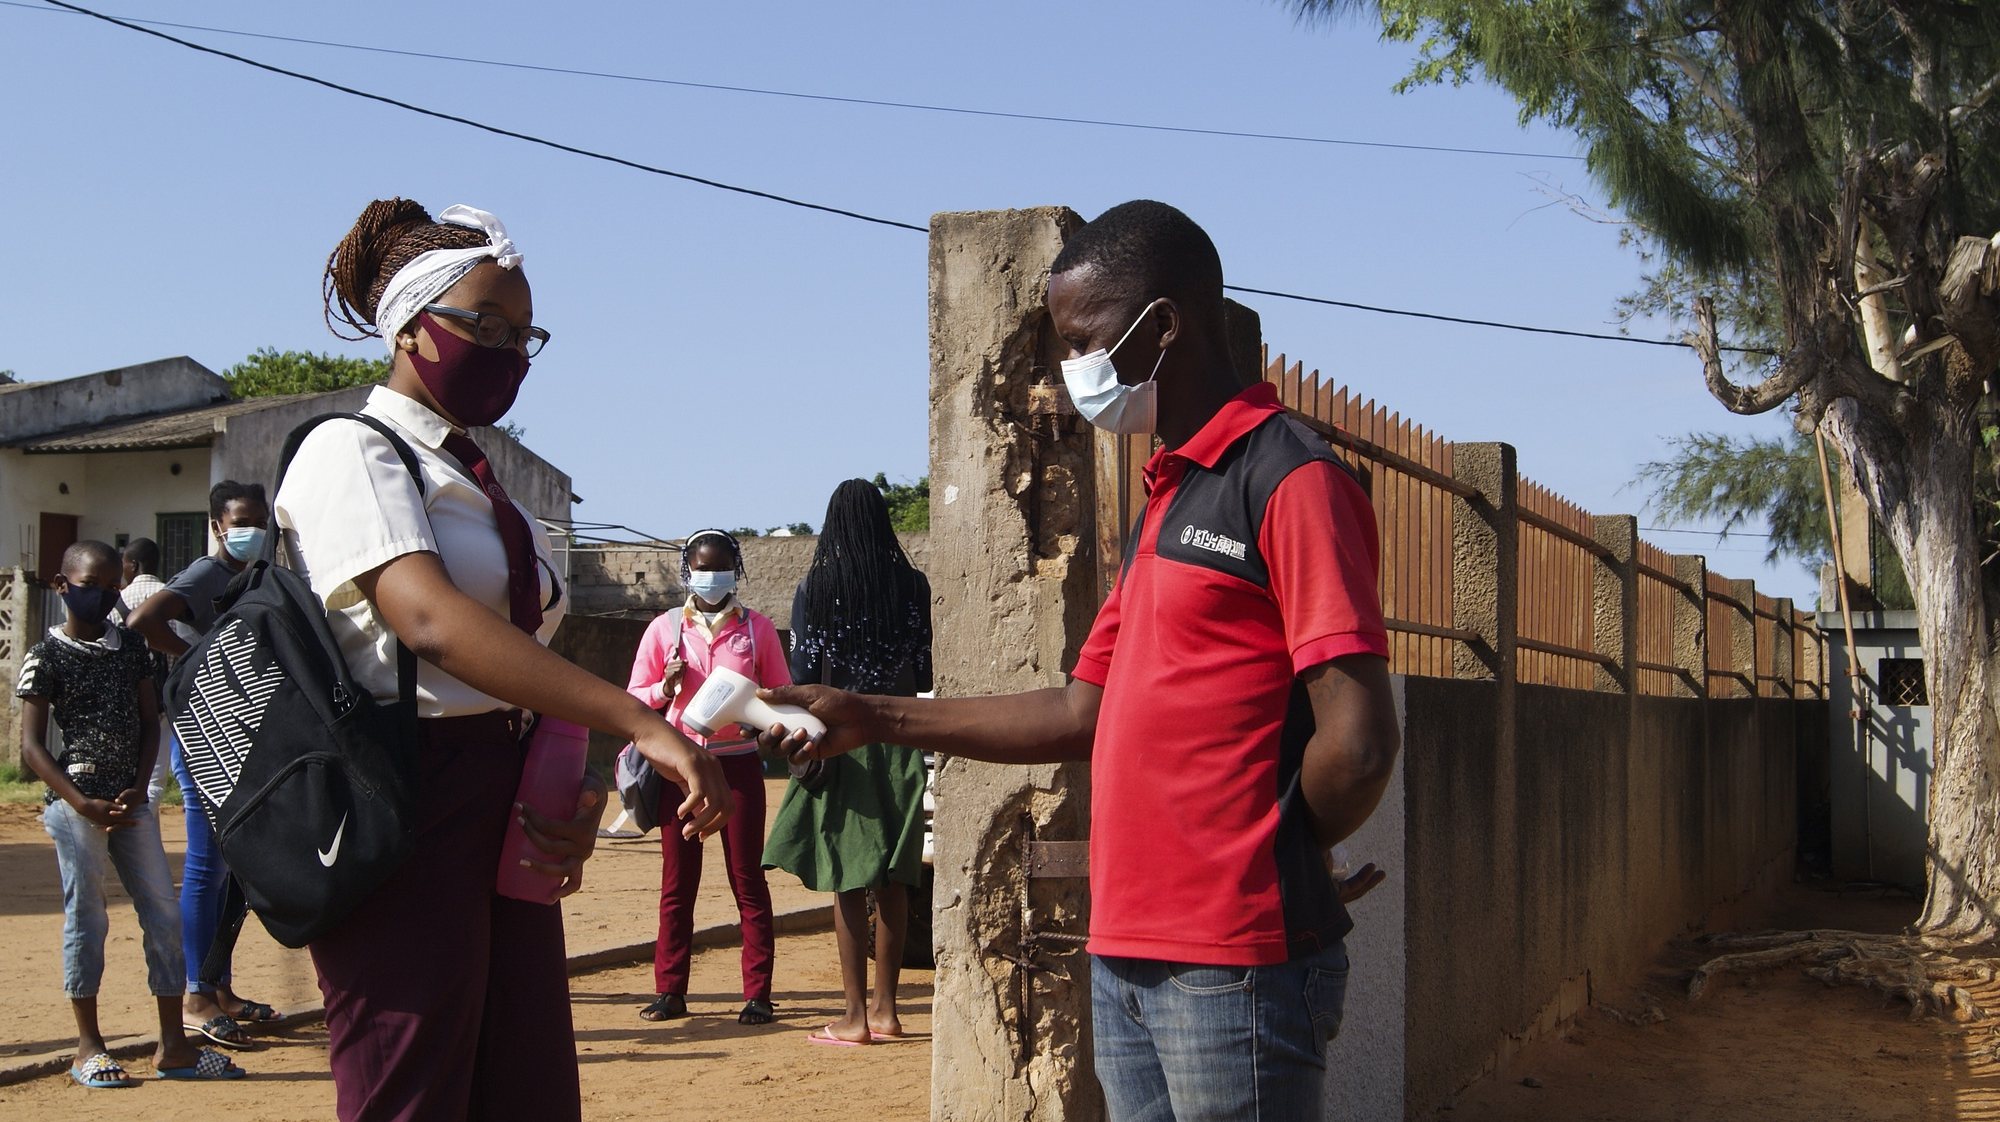 A student measures her body temperature at the entrance of a school on the first day back to school due to covid-19, in Maputo, Mozambique, 22 March 2021. Mozambique lived in a state of emergency between April and September 2020, and since then the state of calamity has been in effect, a legal designation to frame several restrictions aimed at preventing covid-19, which included the suspension of classes. LUISA NHANTUMBO/LUSA